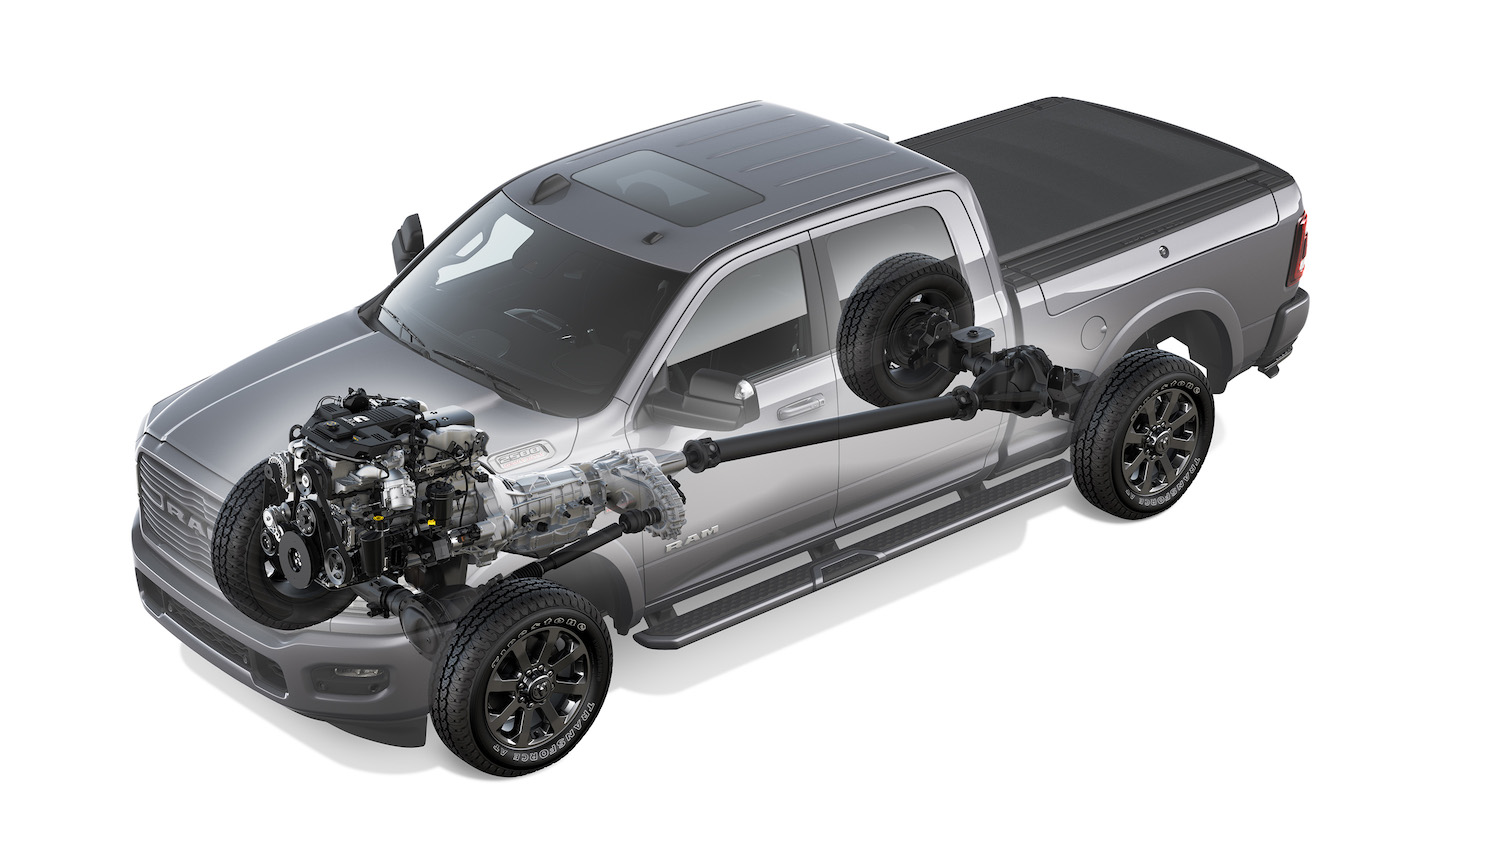 Cutaway of a Ram 2500 heavy-duty truck with Cumins turbodiesel engine available.